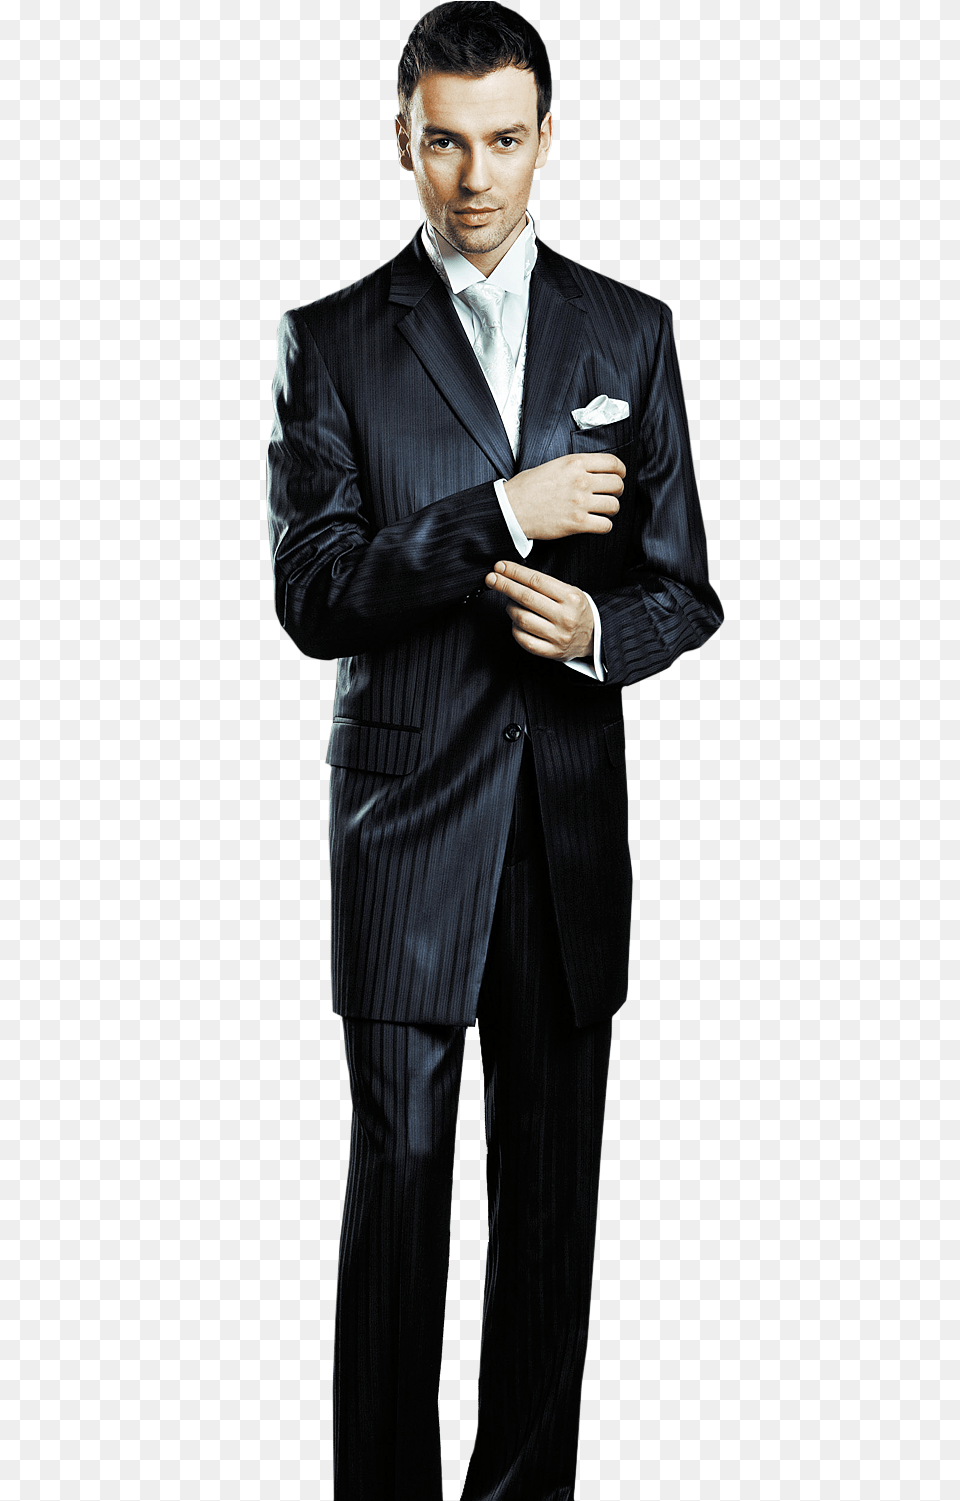 Businessman File Man In Suit Transparent, Tuxedo, Formal Wear, Clothing, Adult Png